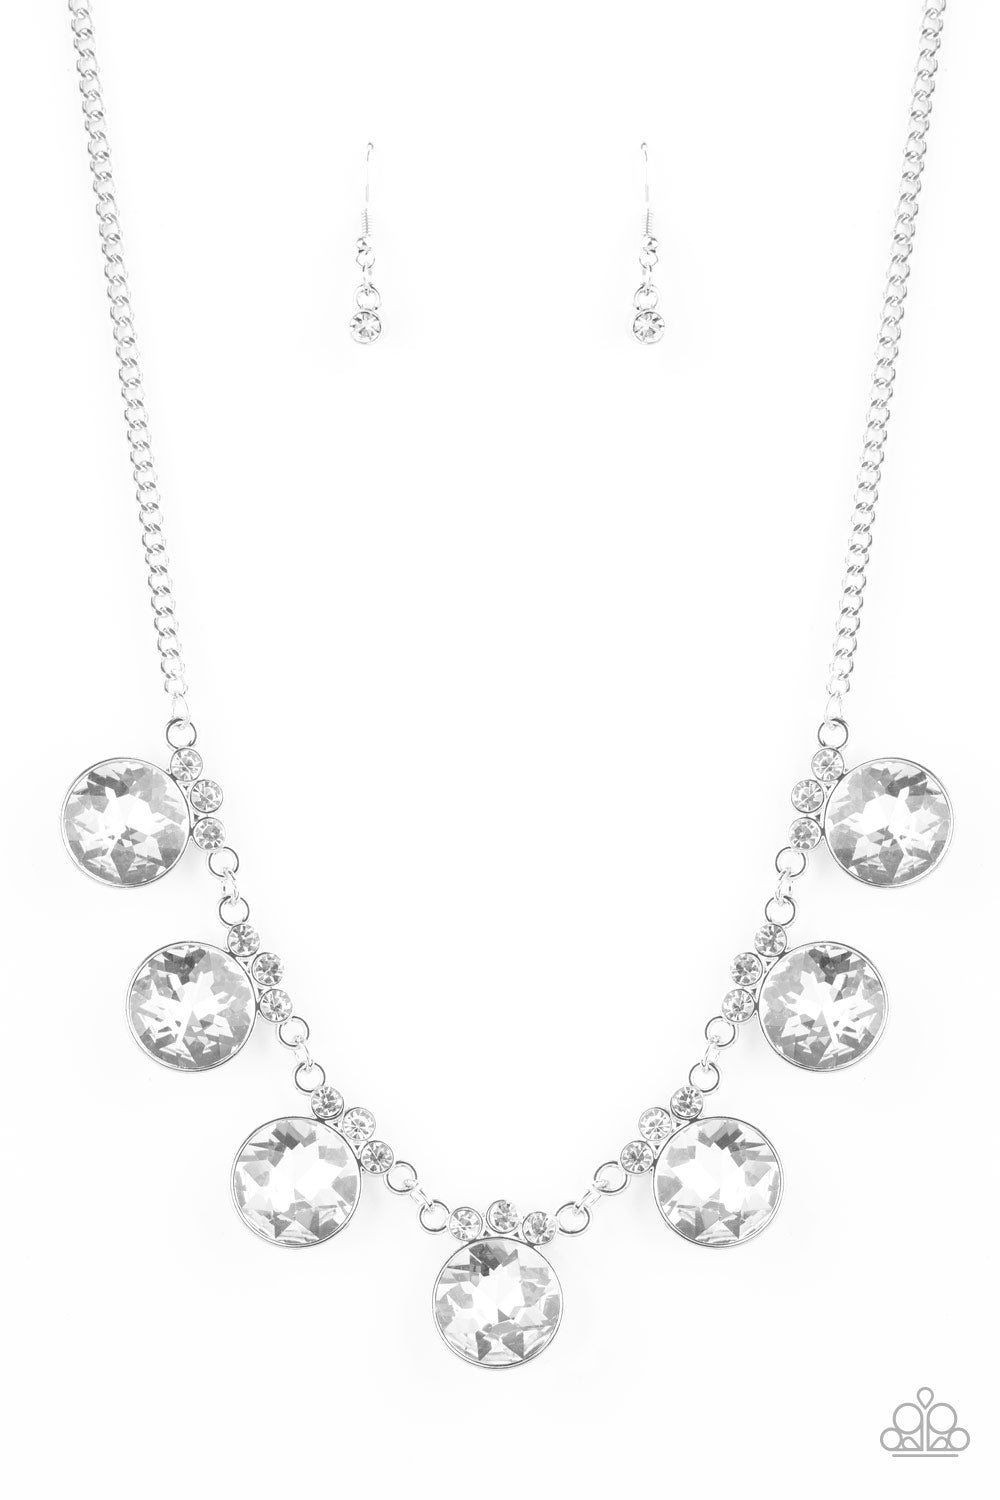 GLOW-Getter Glamour - White gems necklace